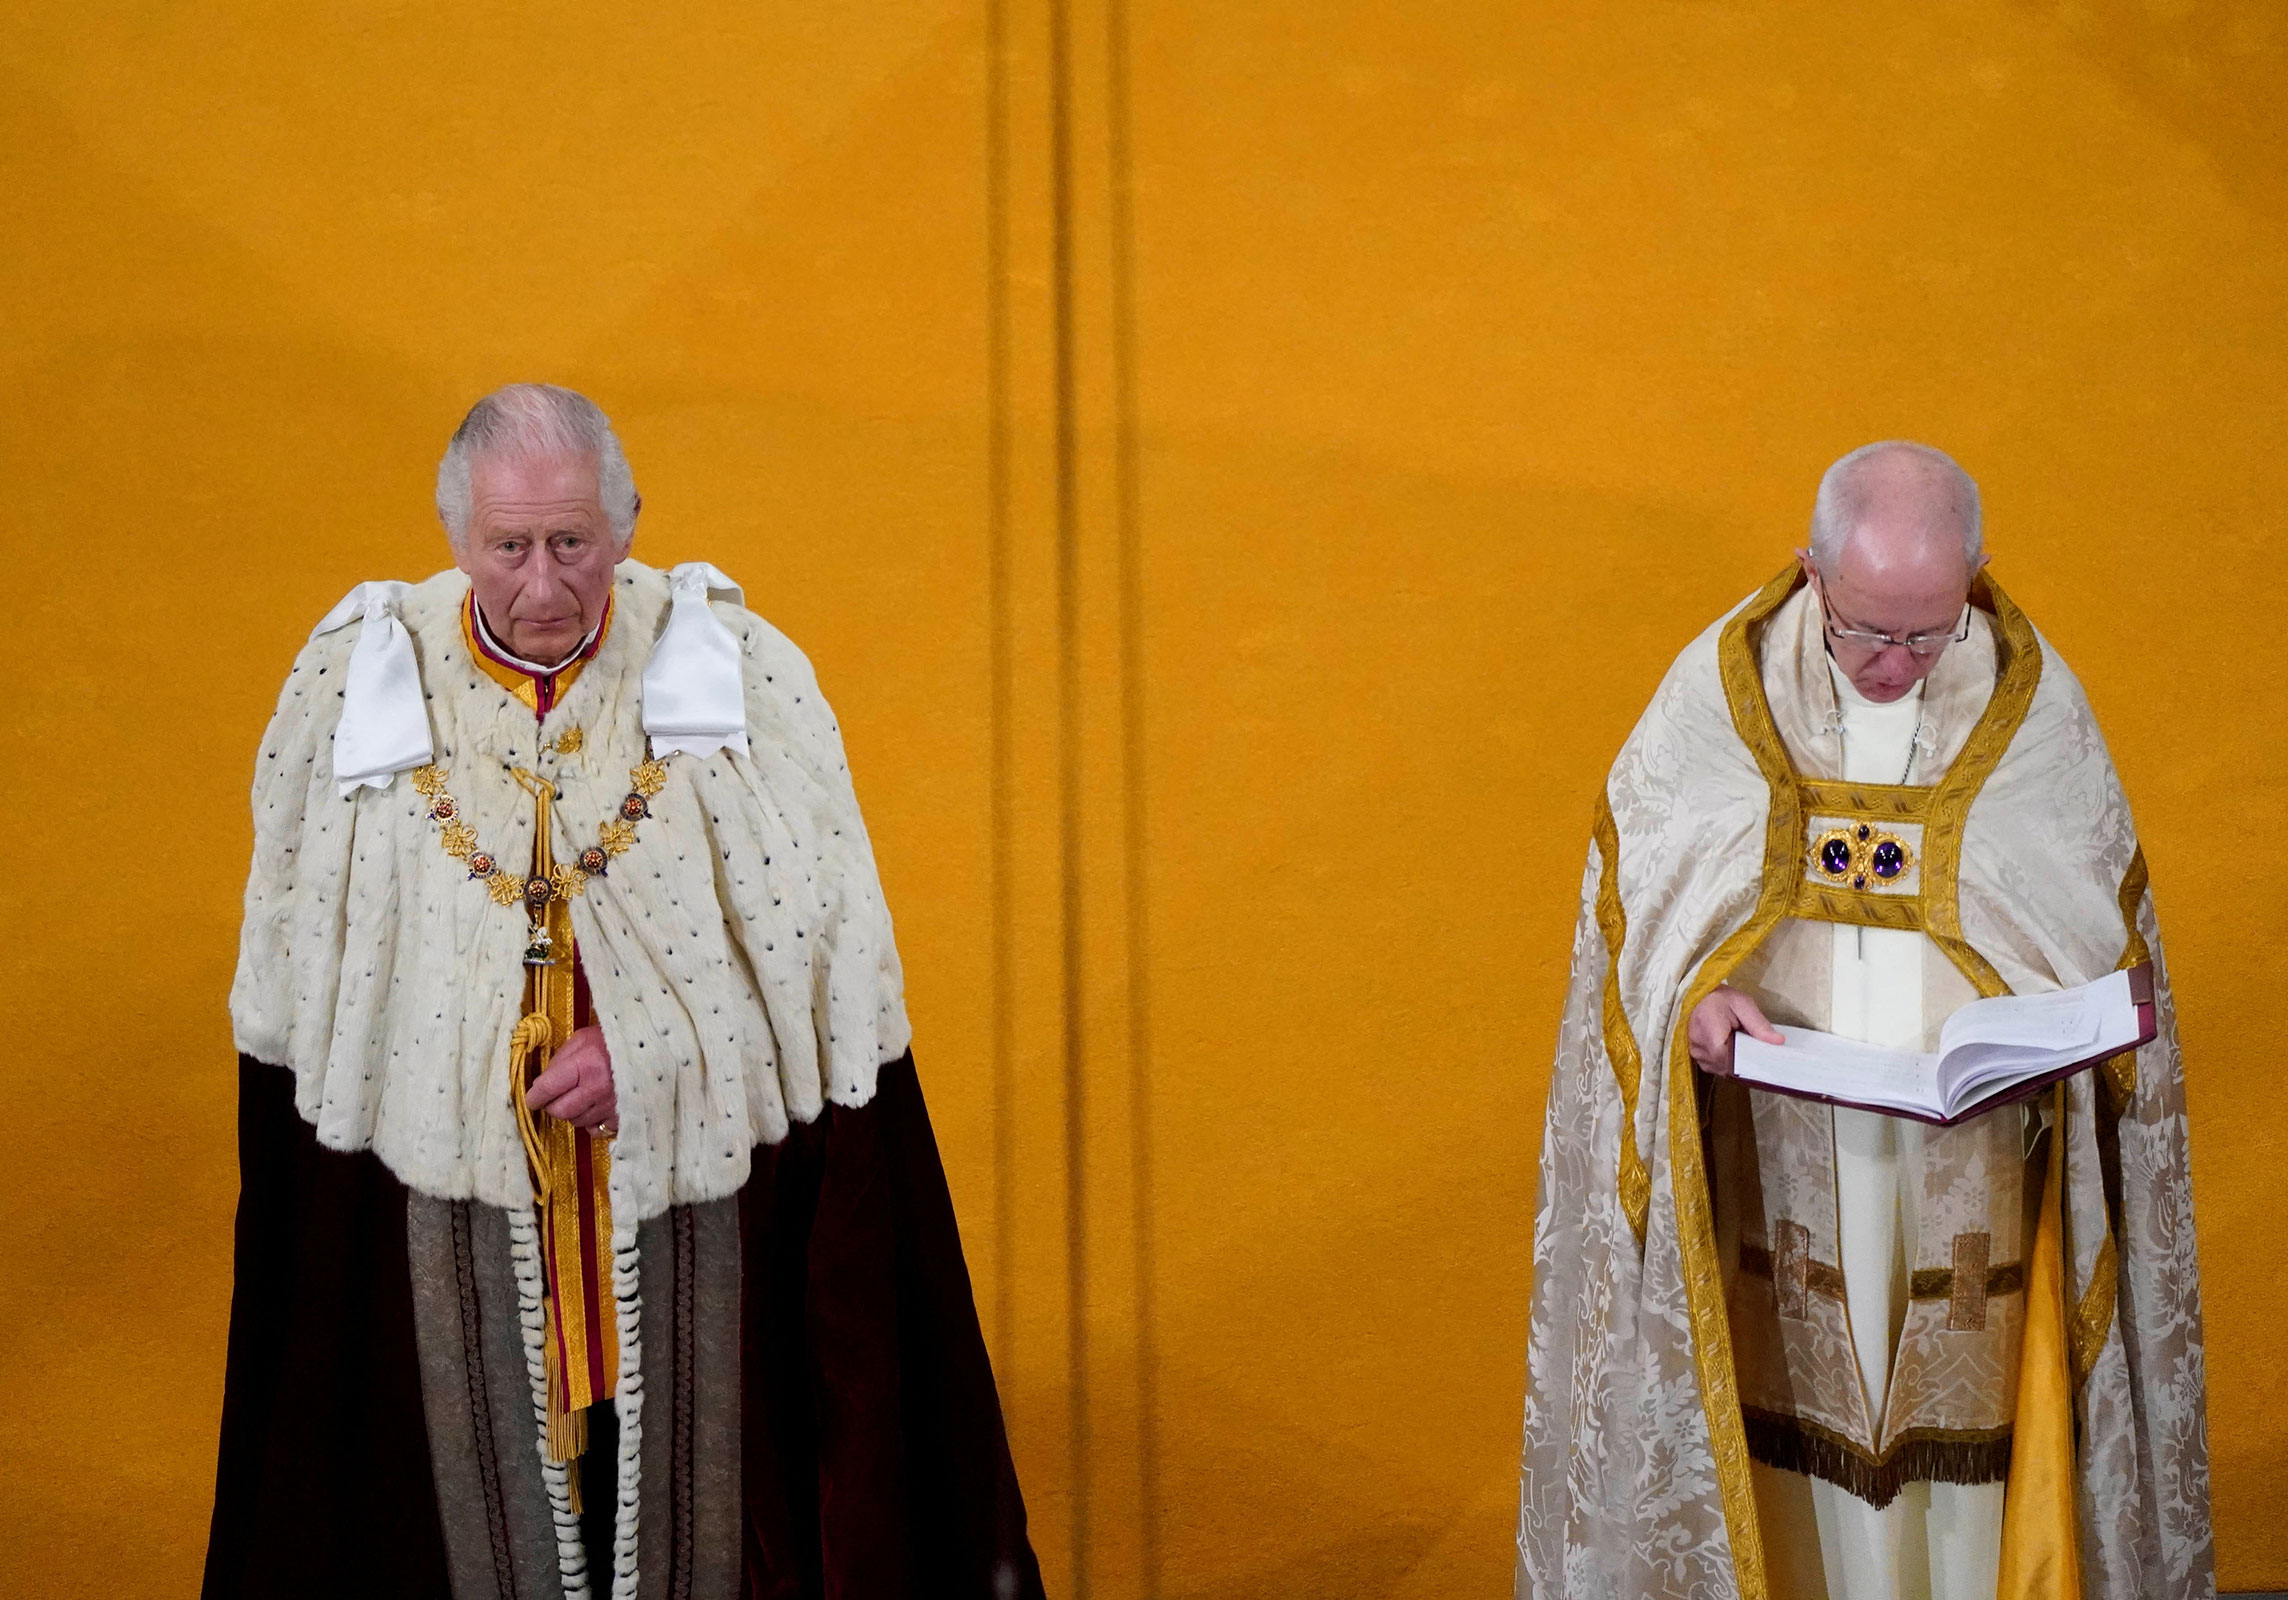 King Charles III and the Archbishop of Canterbury Justin Welby during the coronation ceremony.